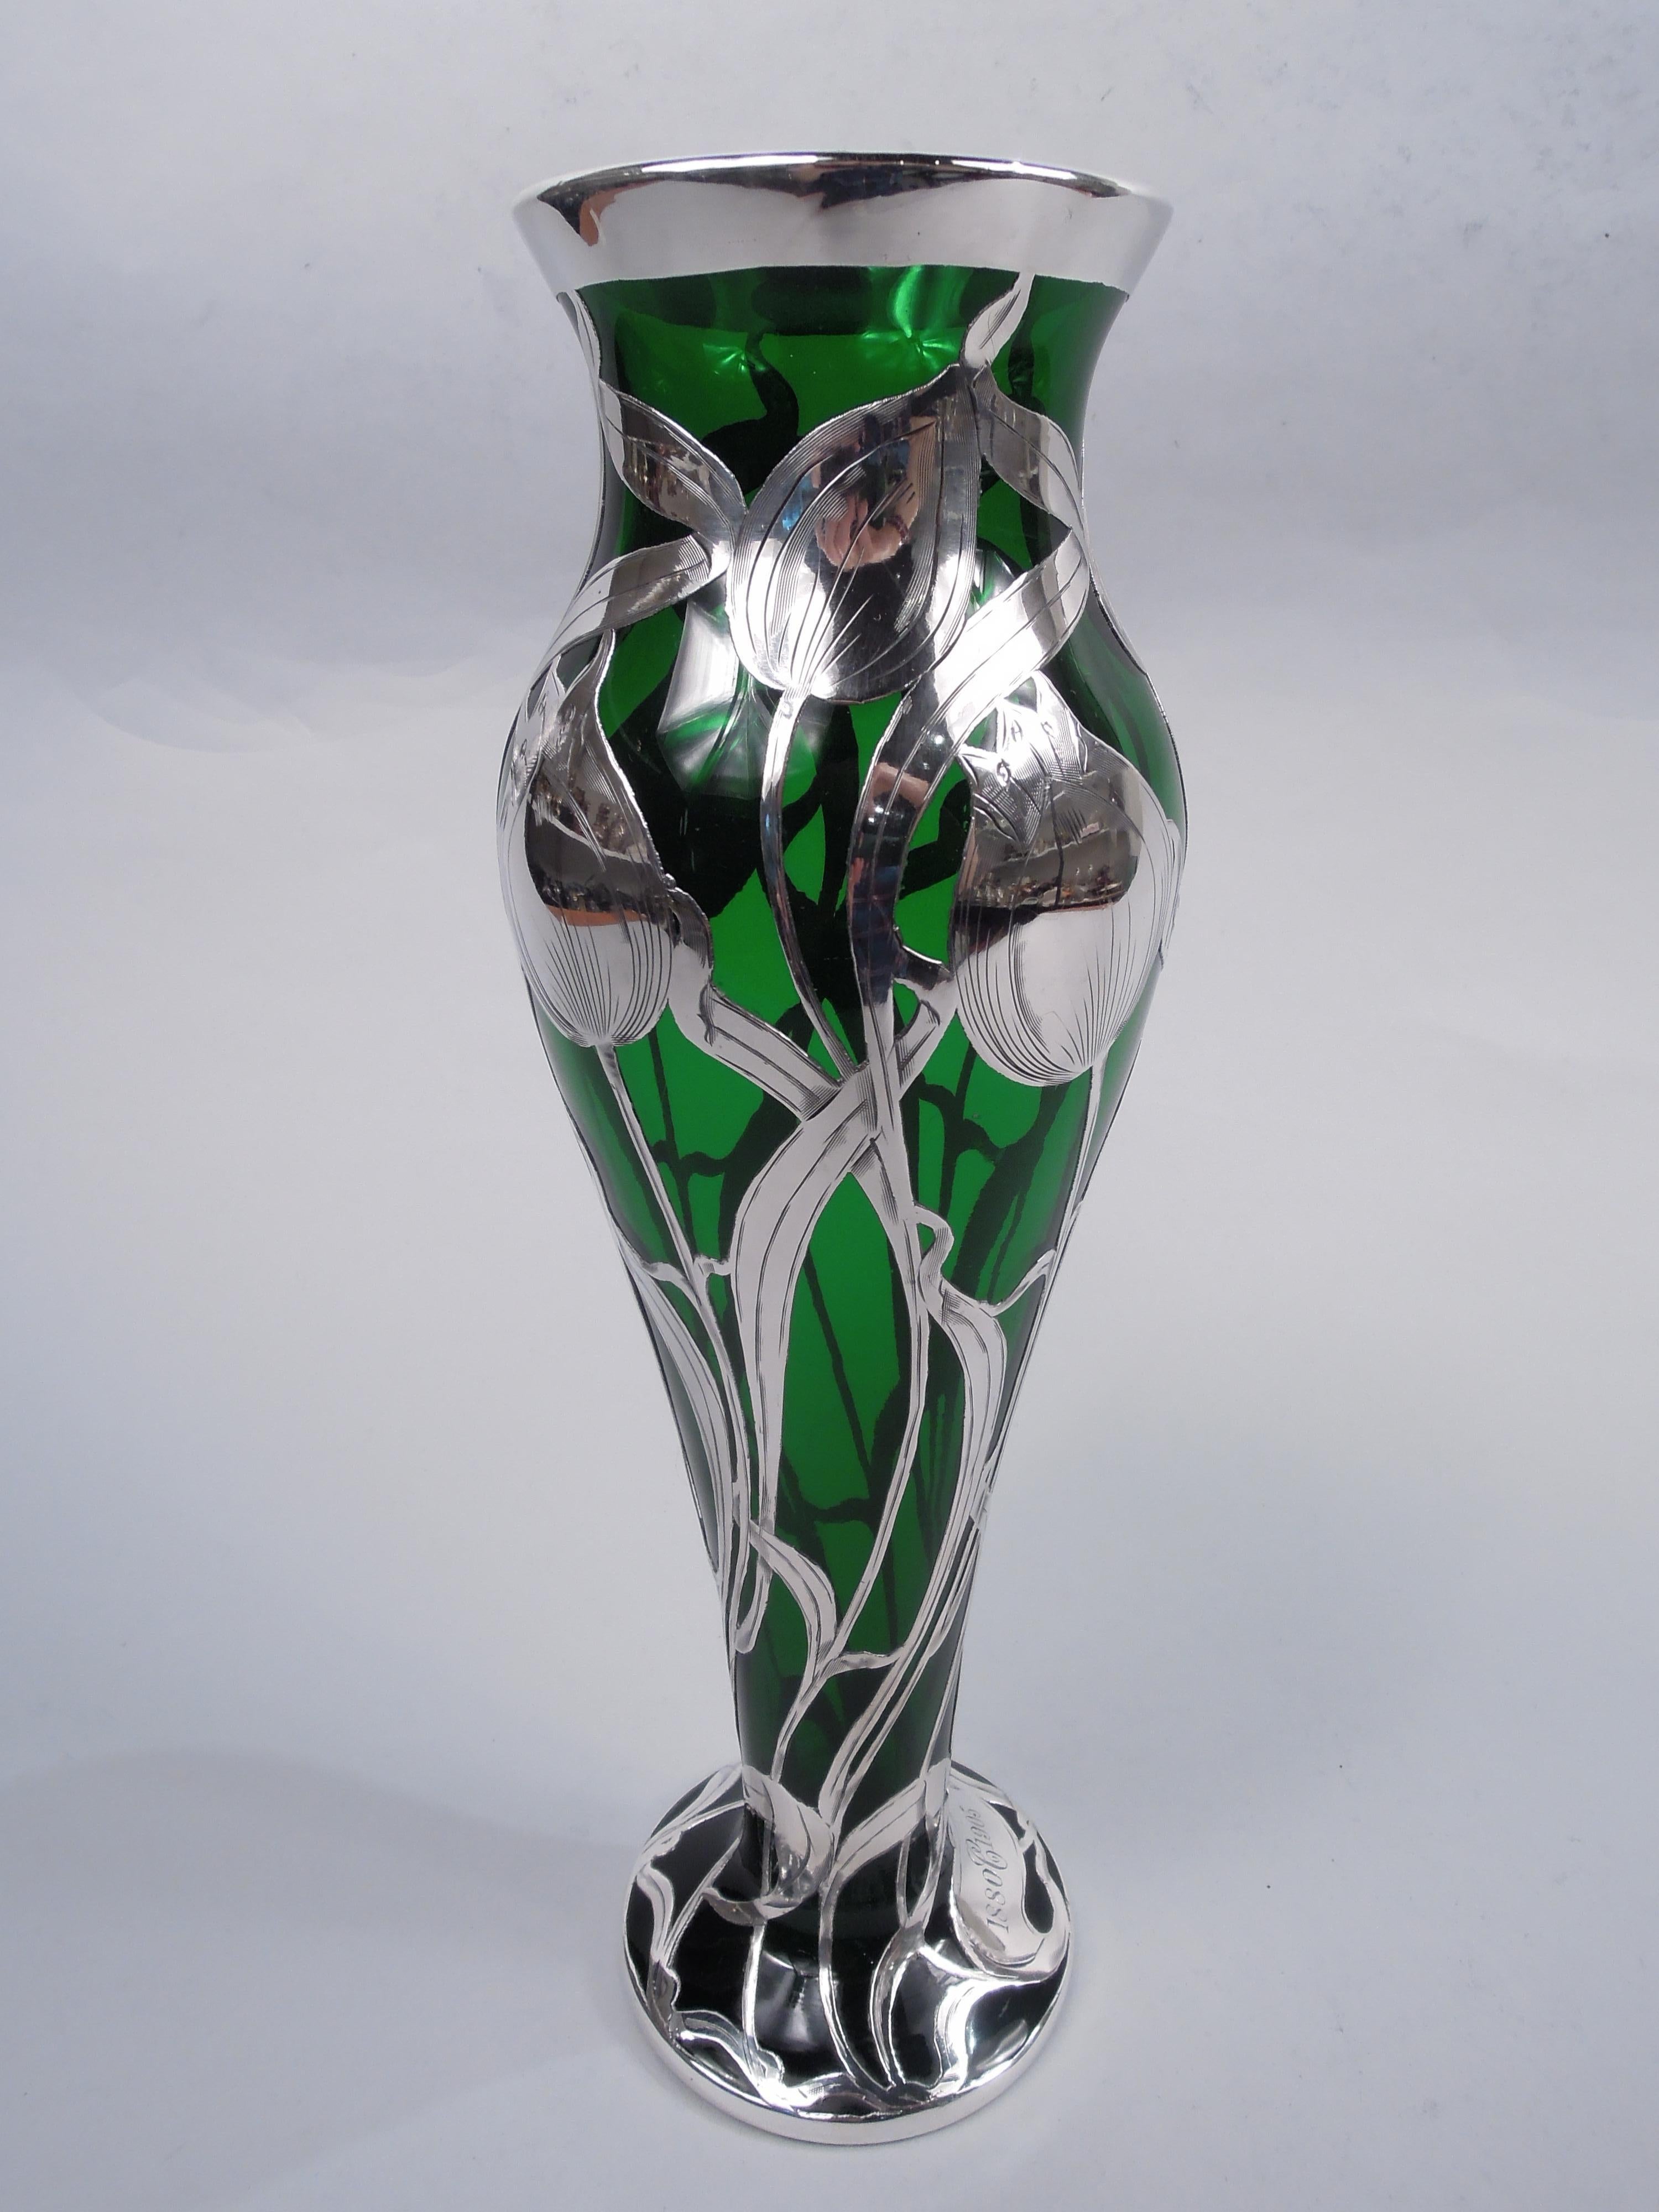 Turn-of-the-century Art Nouveau glass vase with engraved silver overlay. Elongated baluster with flared rim and raised foot. Overlay in form of budding and blooming tulips with entwined and whiplash tendrils. On foot is scrolled cartouche engraved